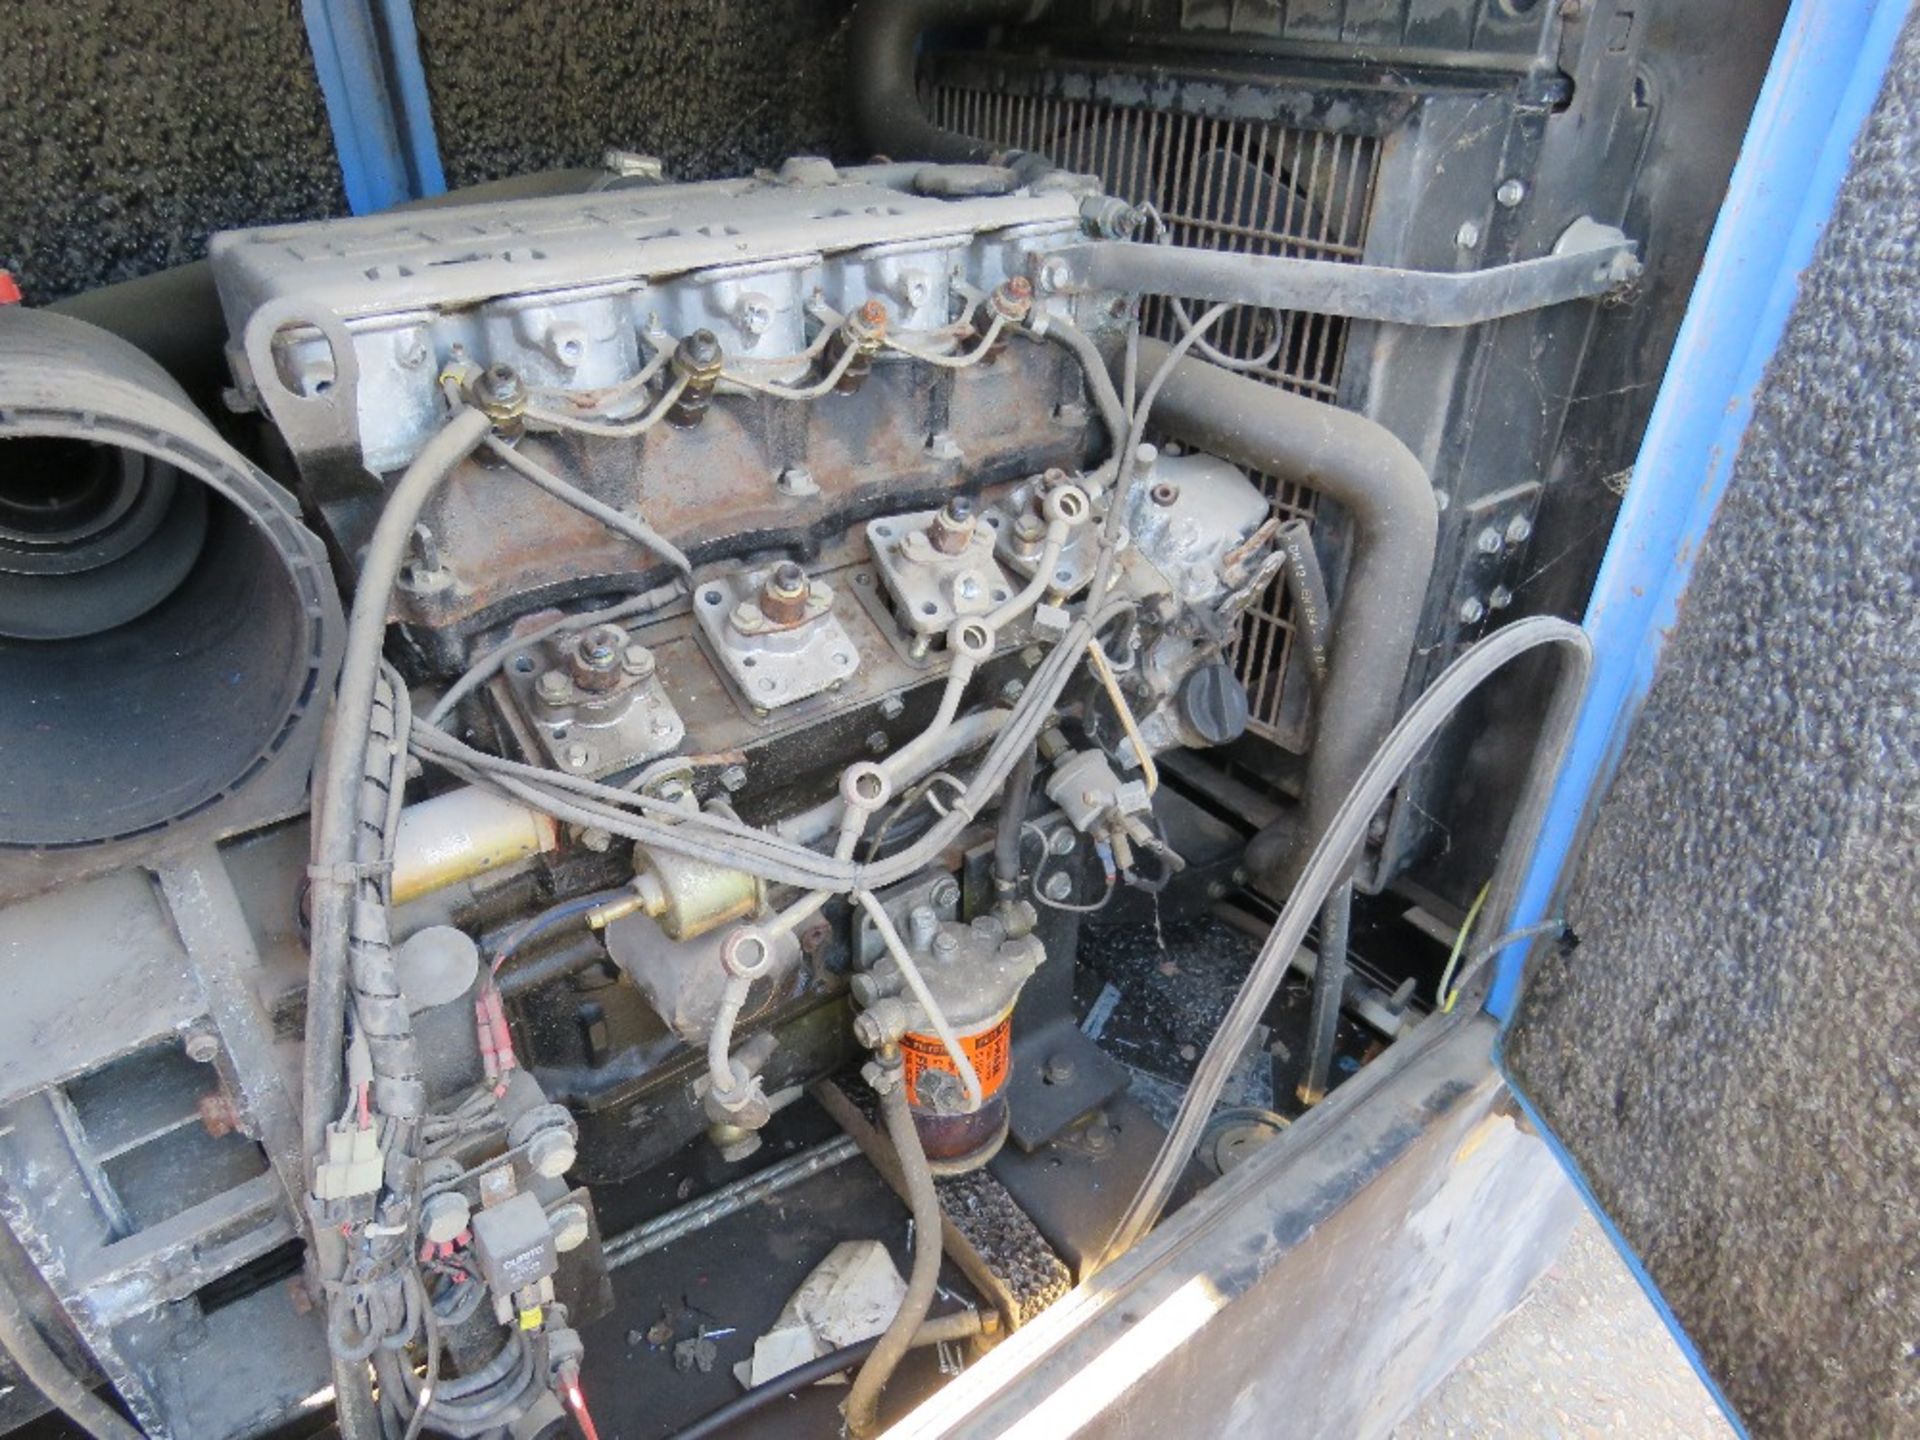 STEPHILL SSDX20 GENERATOR SET, ISUZU ENGINE, PARTS MISSING, SPARES/REPAIR. THIS LOT IS SOLD UNDER T - Image 7 of 8